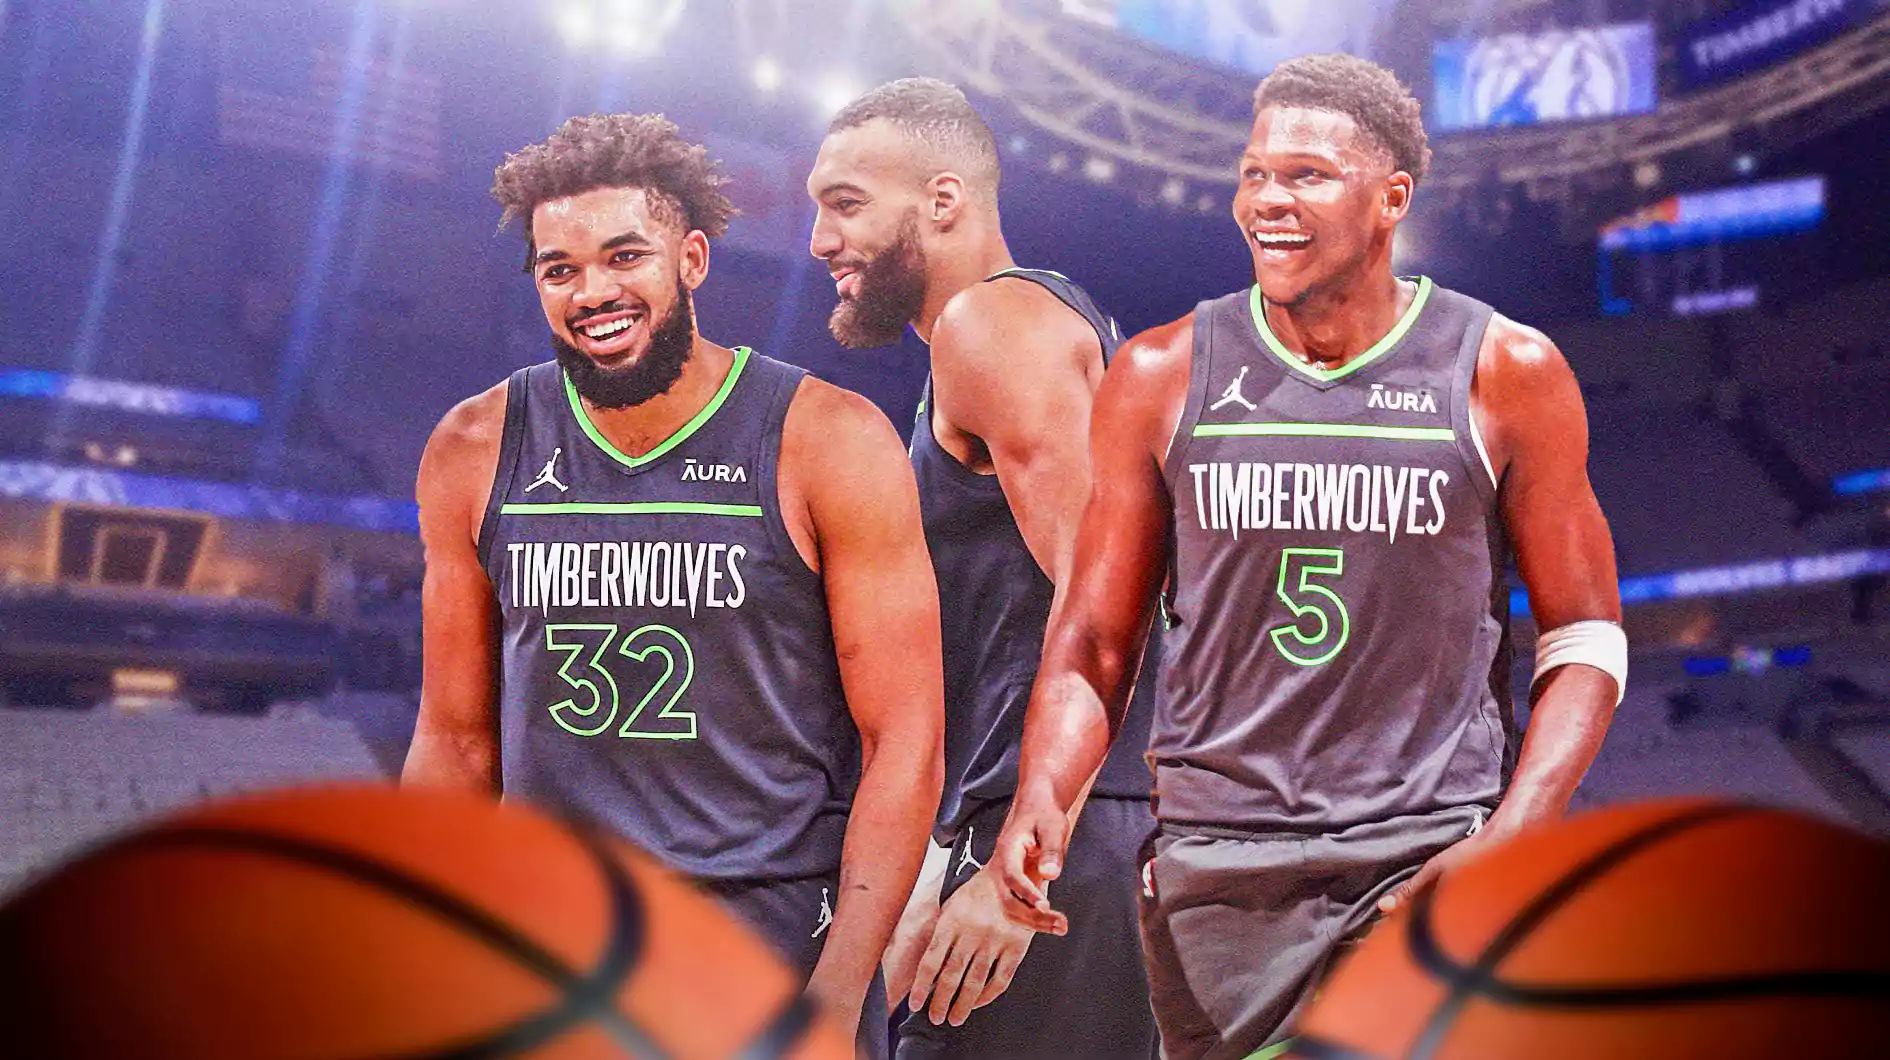 Timberwolves players Karl-Anthony Towns, Rudy Gobert and Anthony Edwards laughing